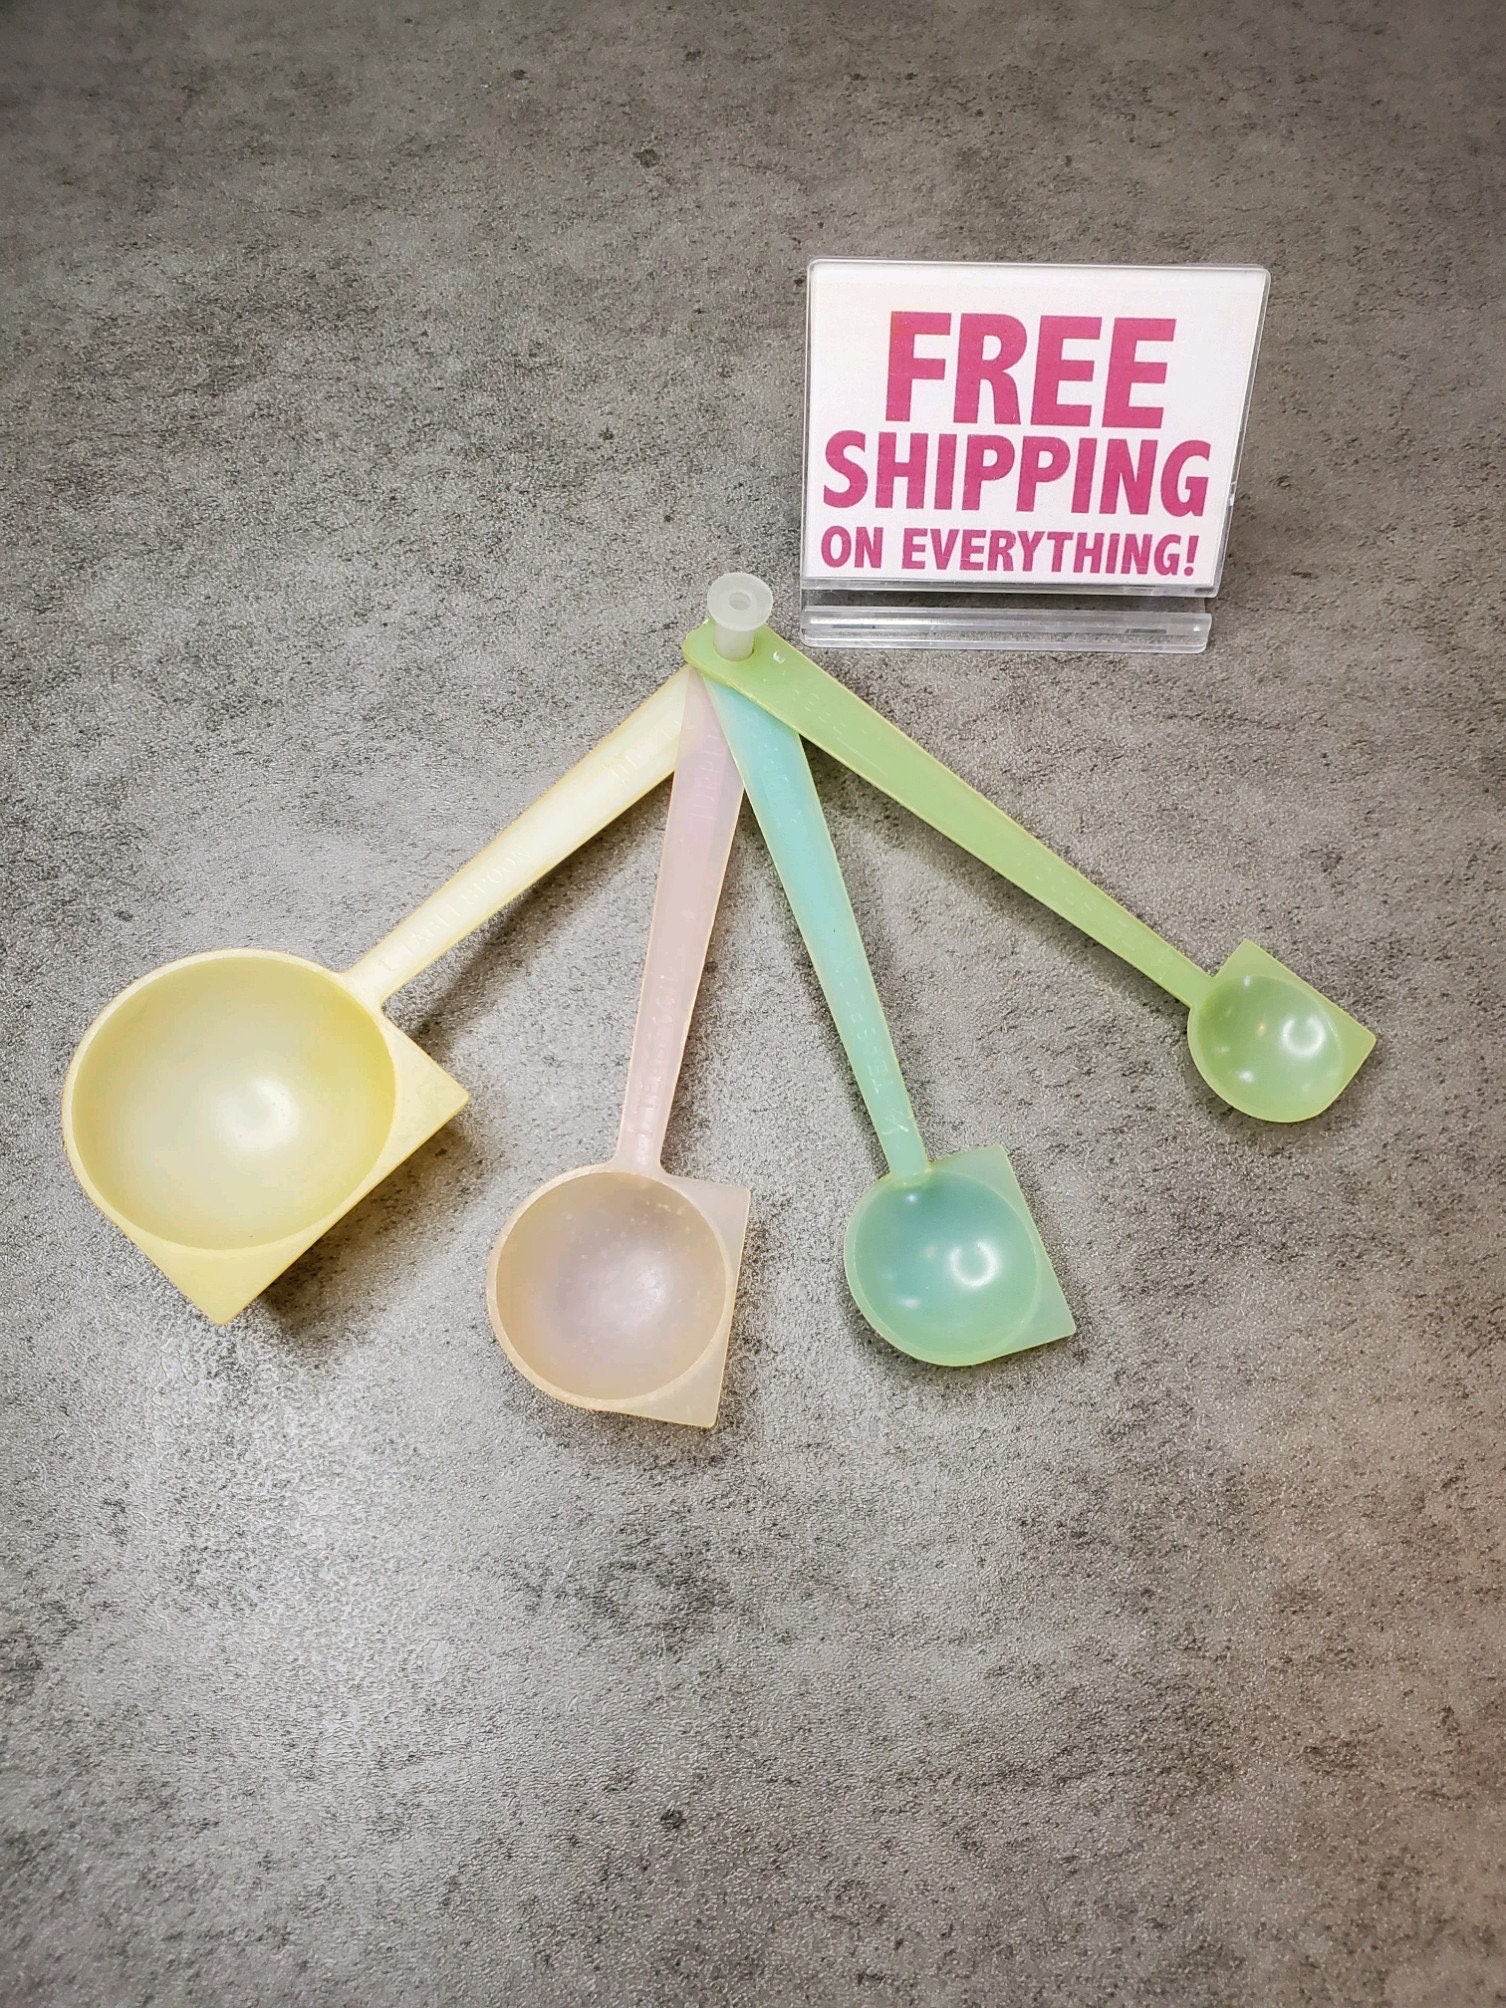 Vintage Assorted Tupperware Measuring Tools Cups Spoons Tangerine Orange /  Banana Yellow Sold Individually Retro Kitchen Replacements Cook 